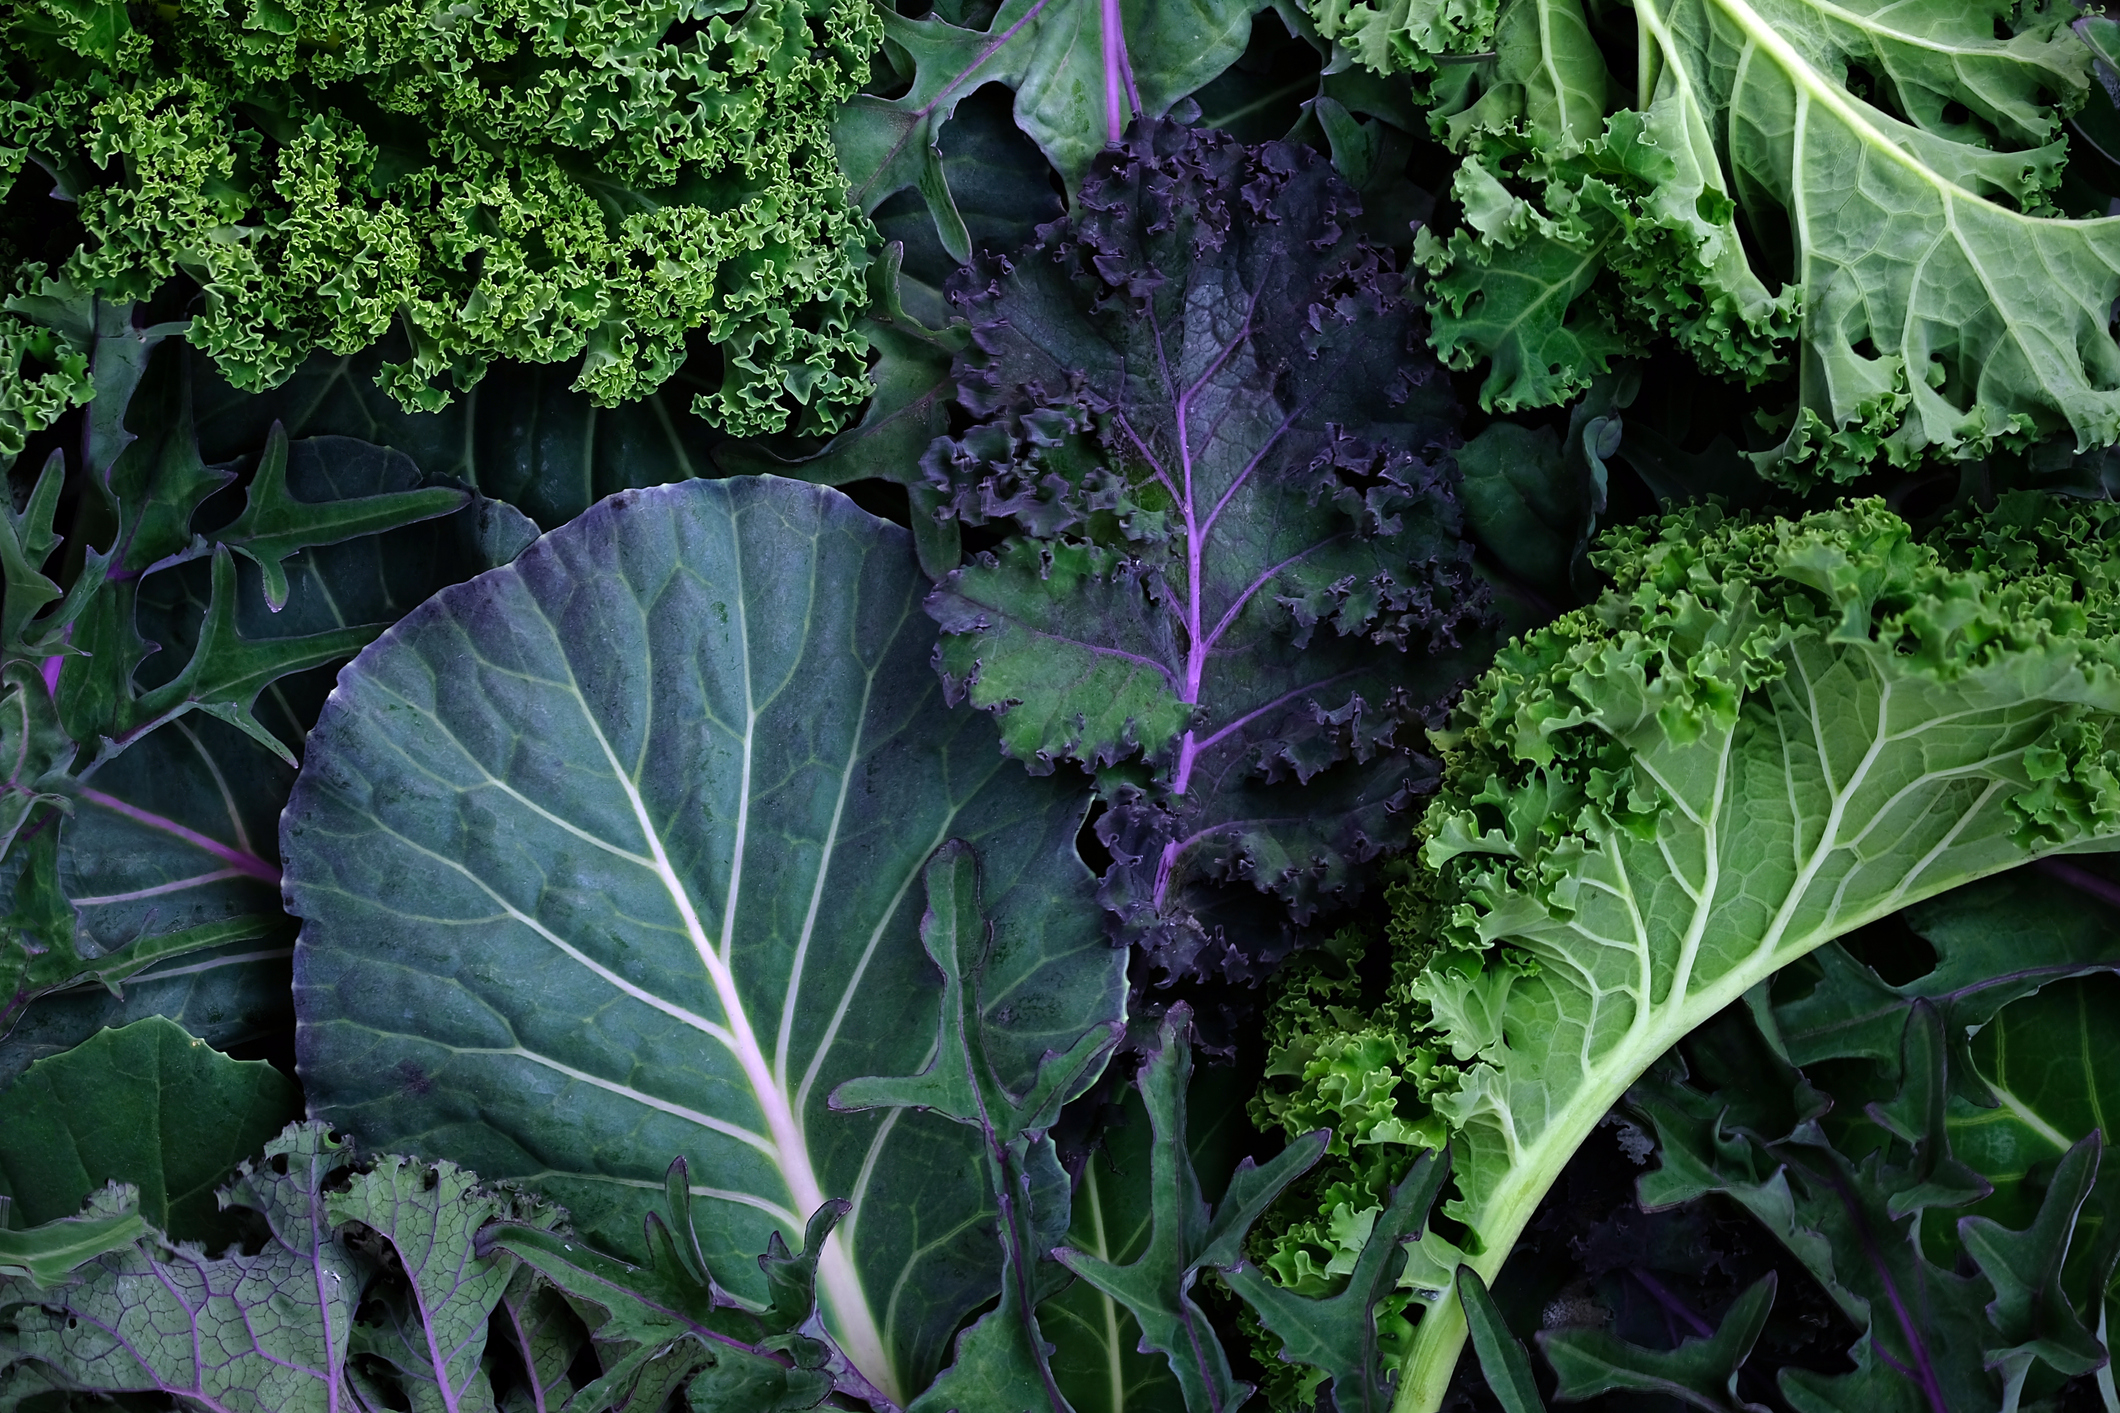 The greens that may save you from stroke or heart attack